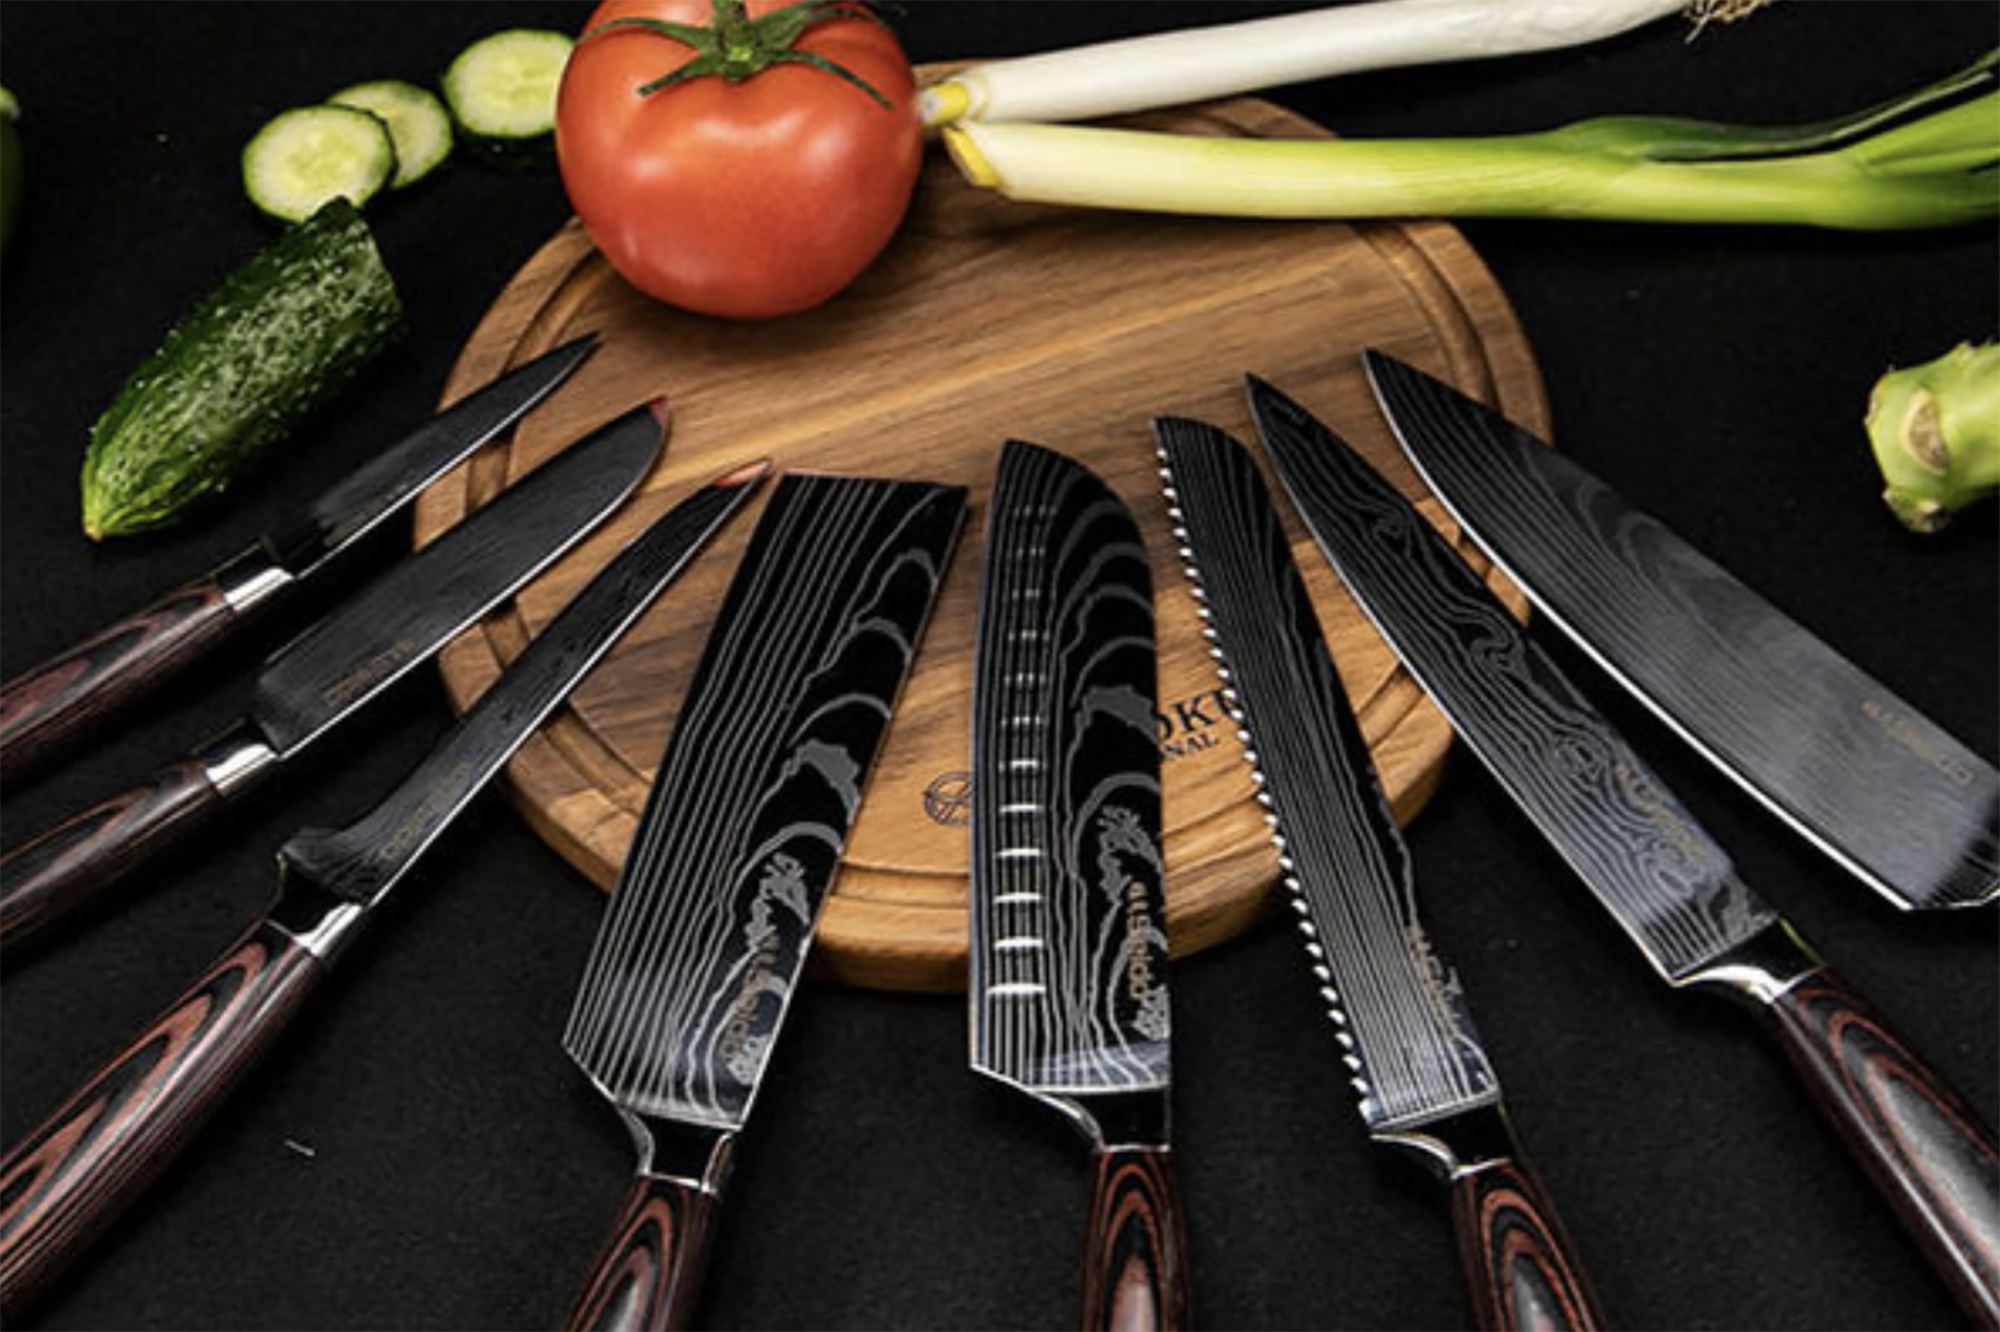 Establish over $300 on this grasp chef knife build in Sunless Friday sale